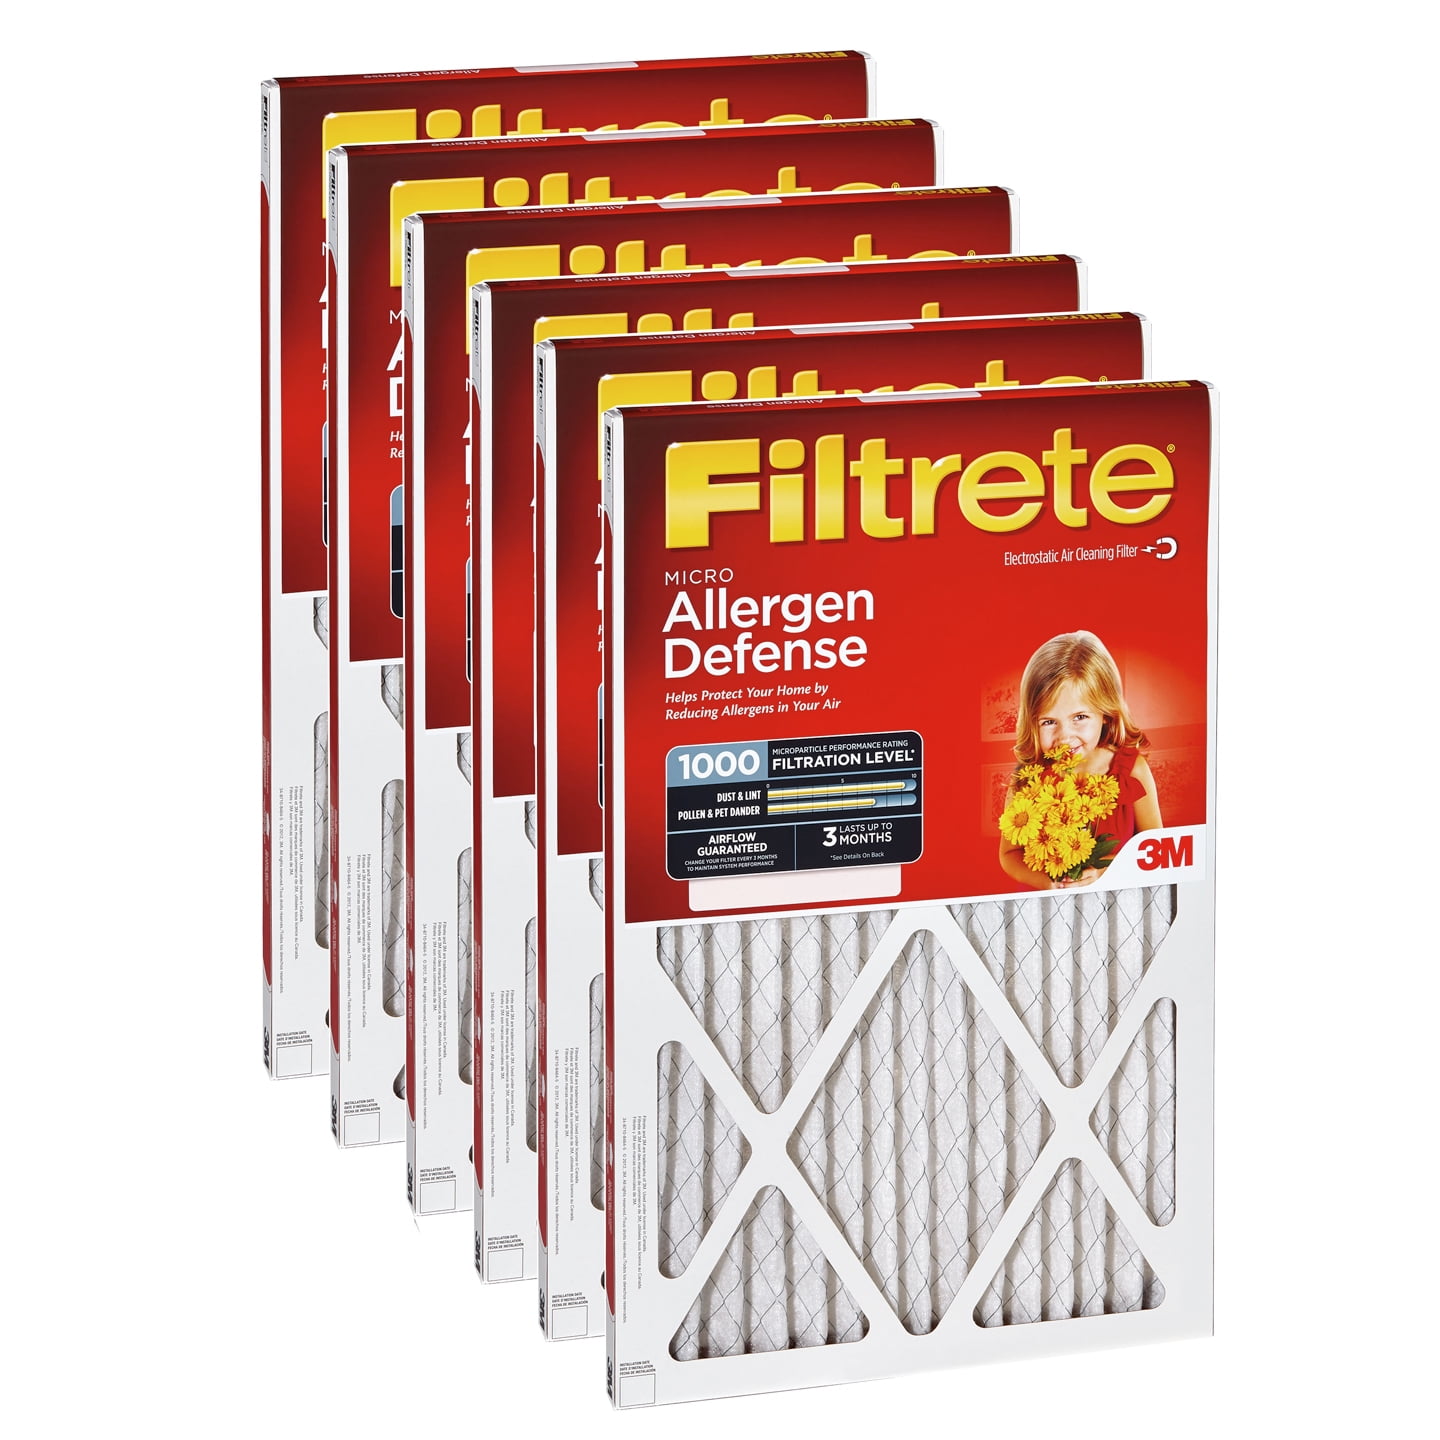 Filtrete Dual-Action Micro Allergen Plus 2X Dust Defense Pack of 4 Air Filters 